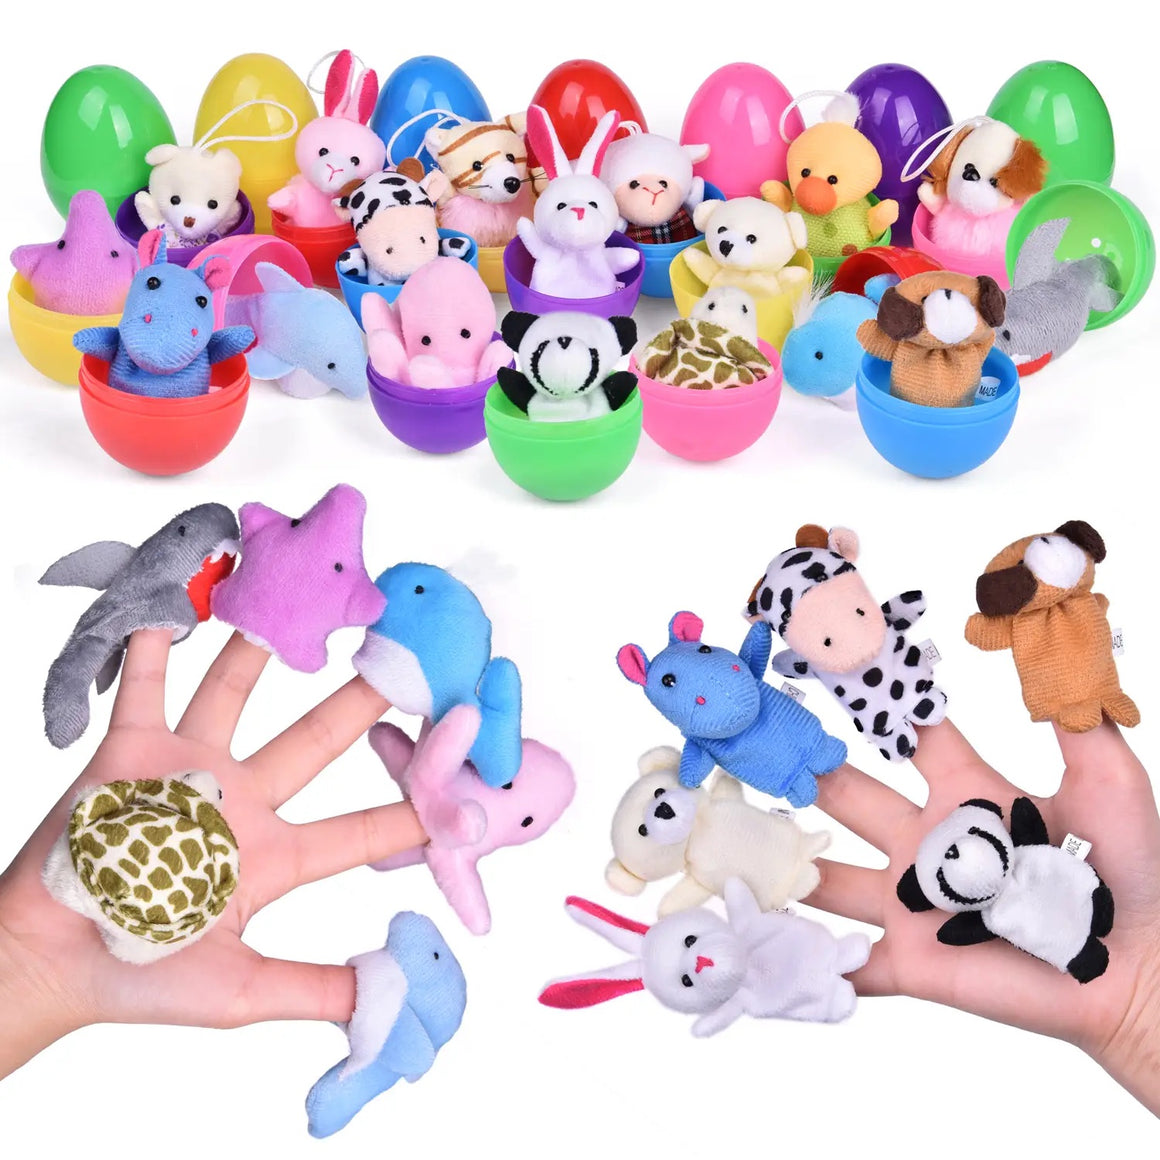 PRE-FILLED SURPRISE EGGS - ASSORTED PLUSH TOYS